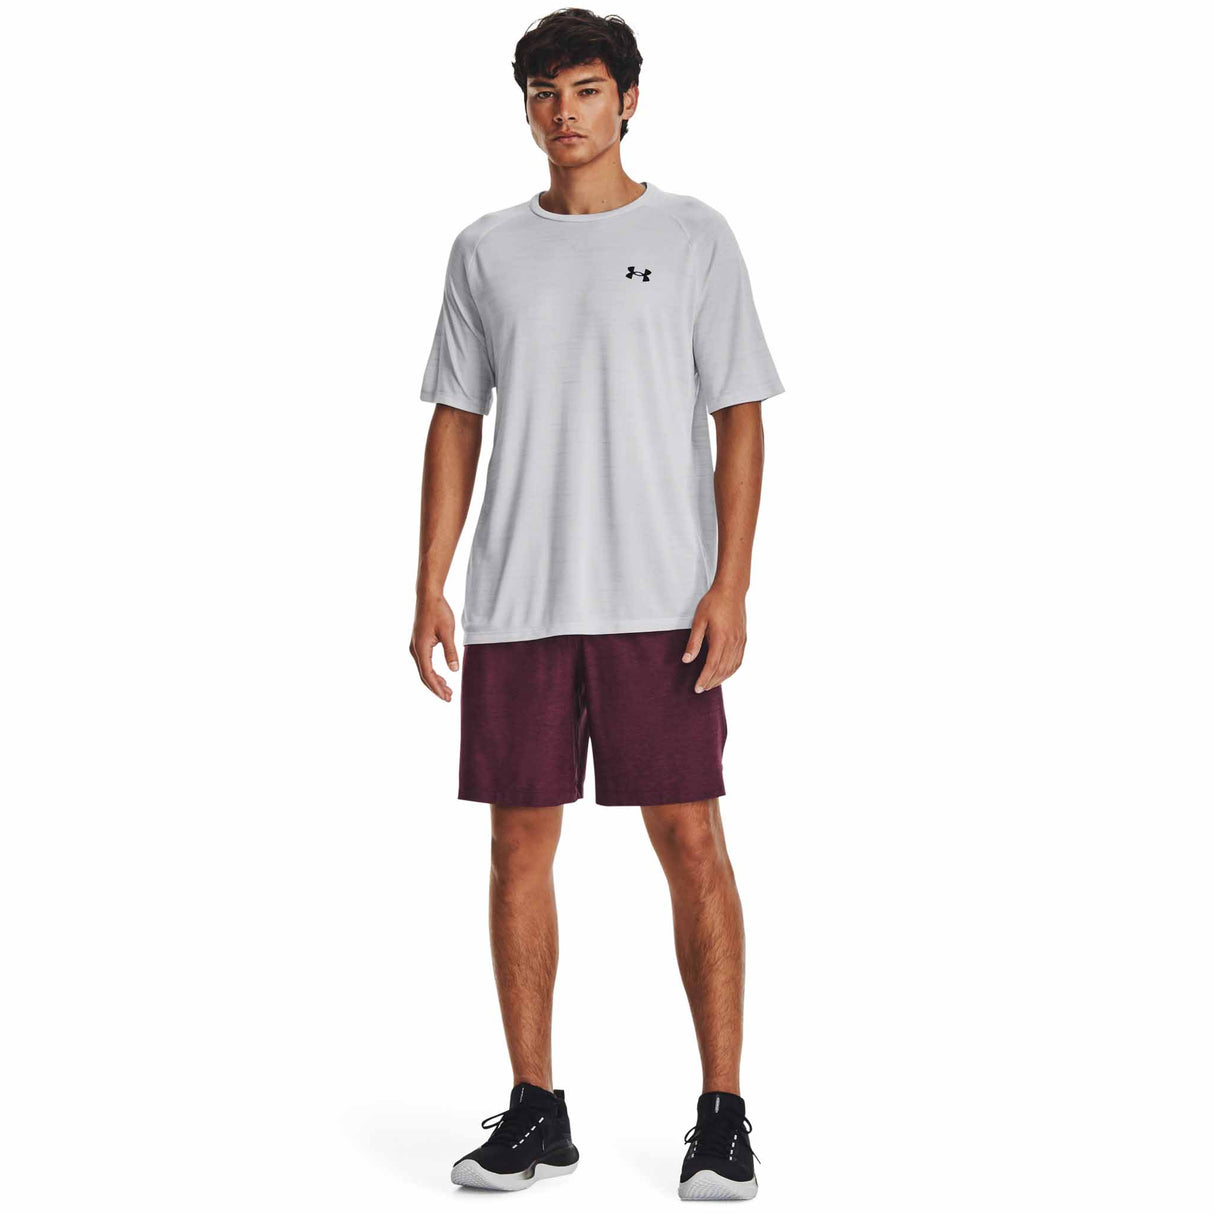 Under Armour Tech Vent shorts pour homme - Dark Maroon / Cordova Red / Black